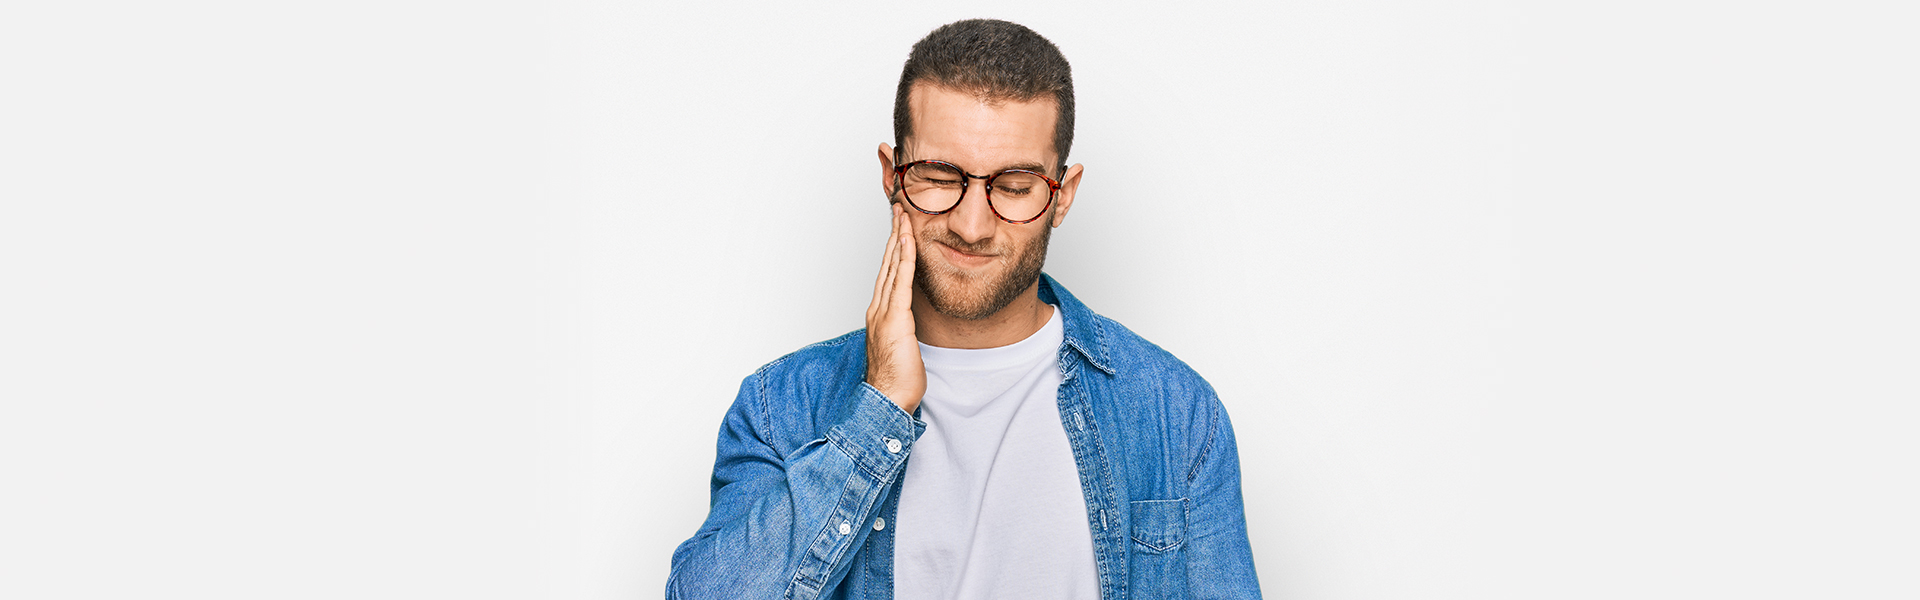 A man with eyeglasses is experiencing a toothache